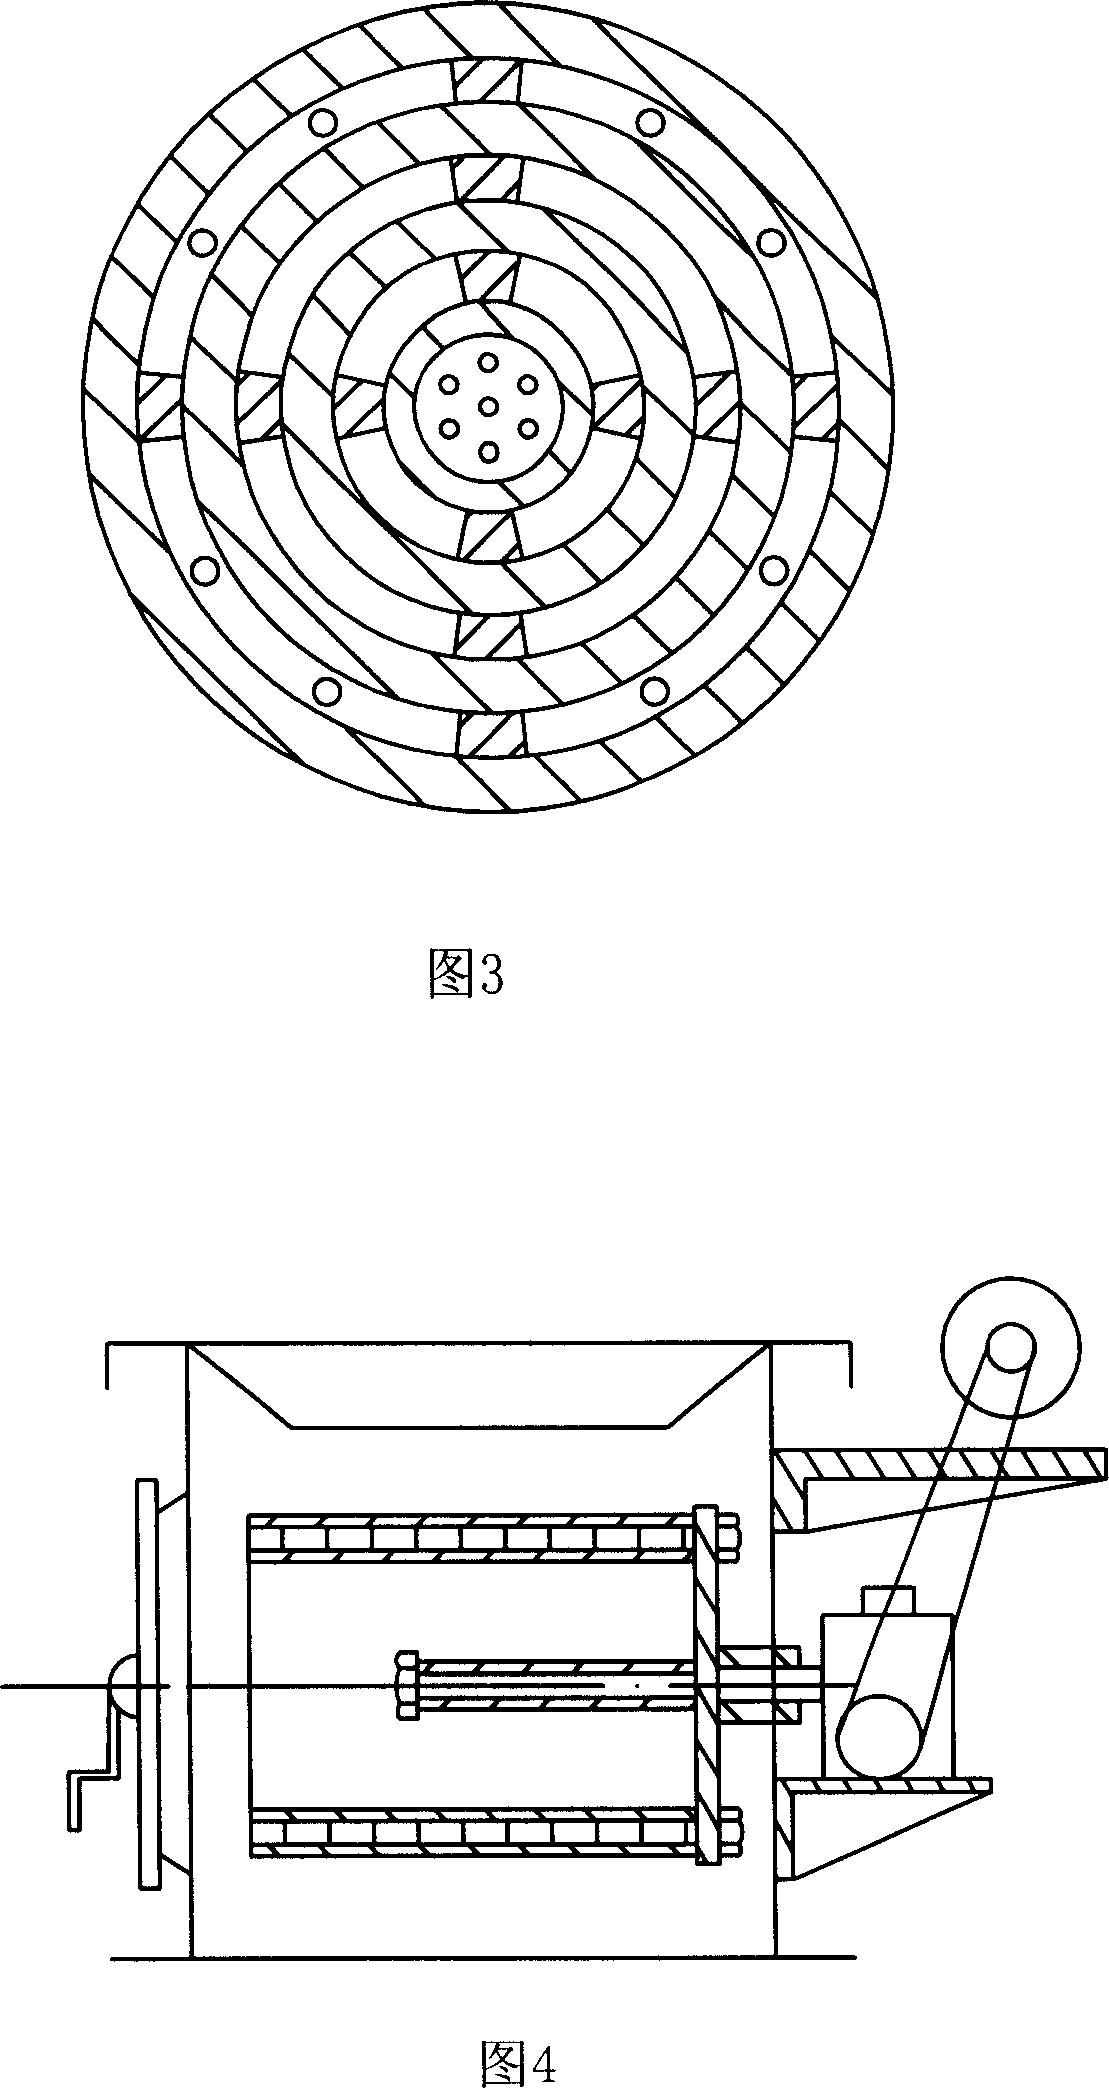 Using method and apparatus for petroleum coke powder fuel for smelting glass